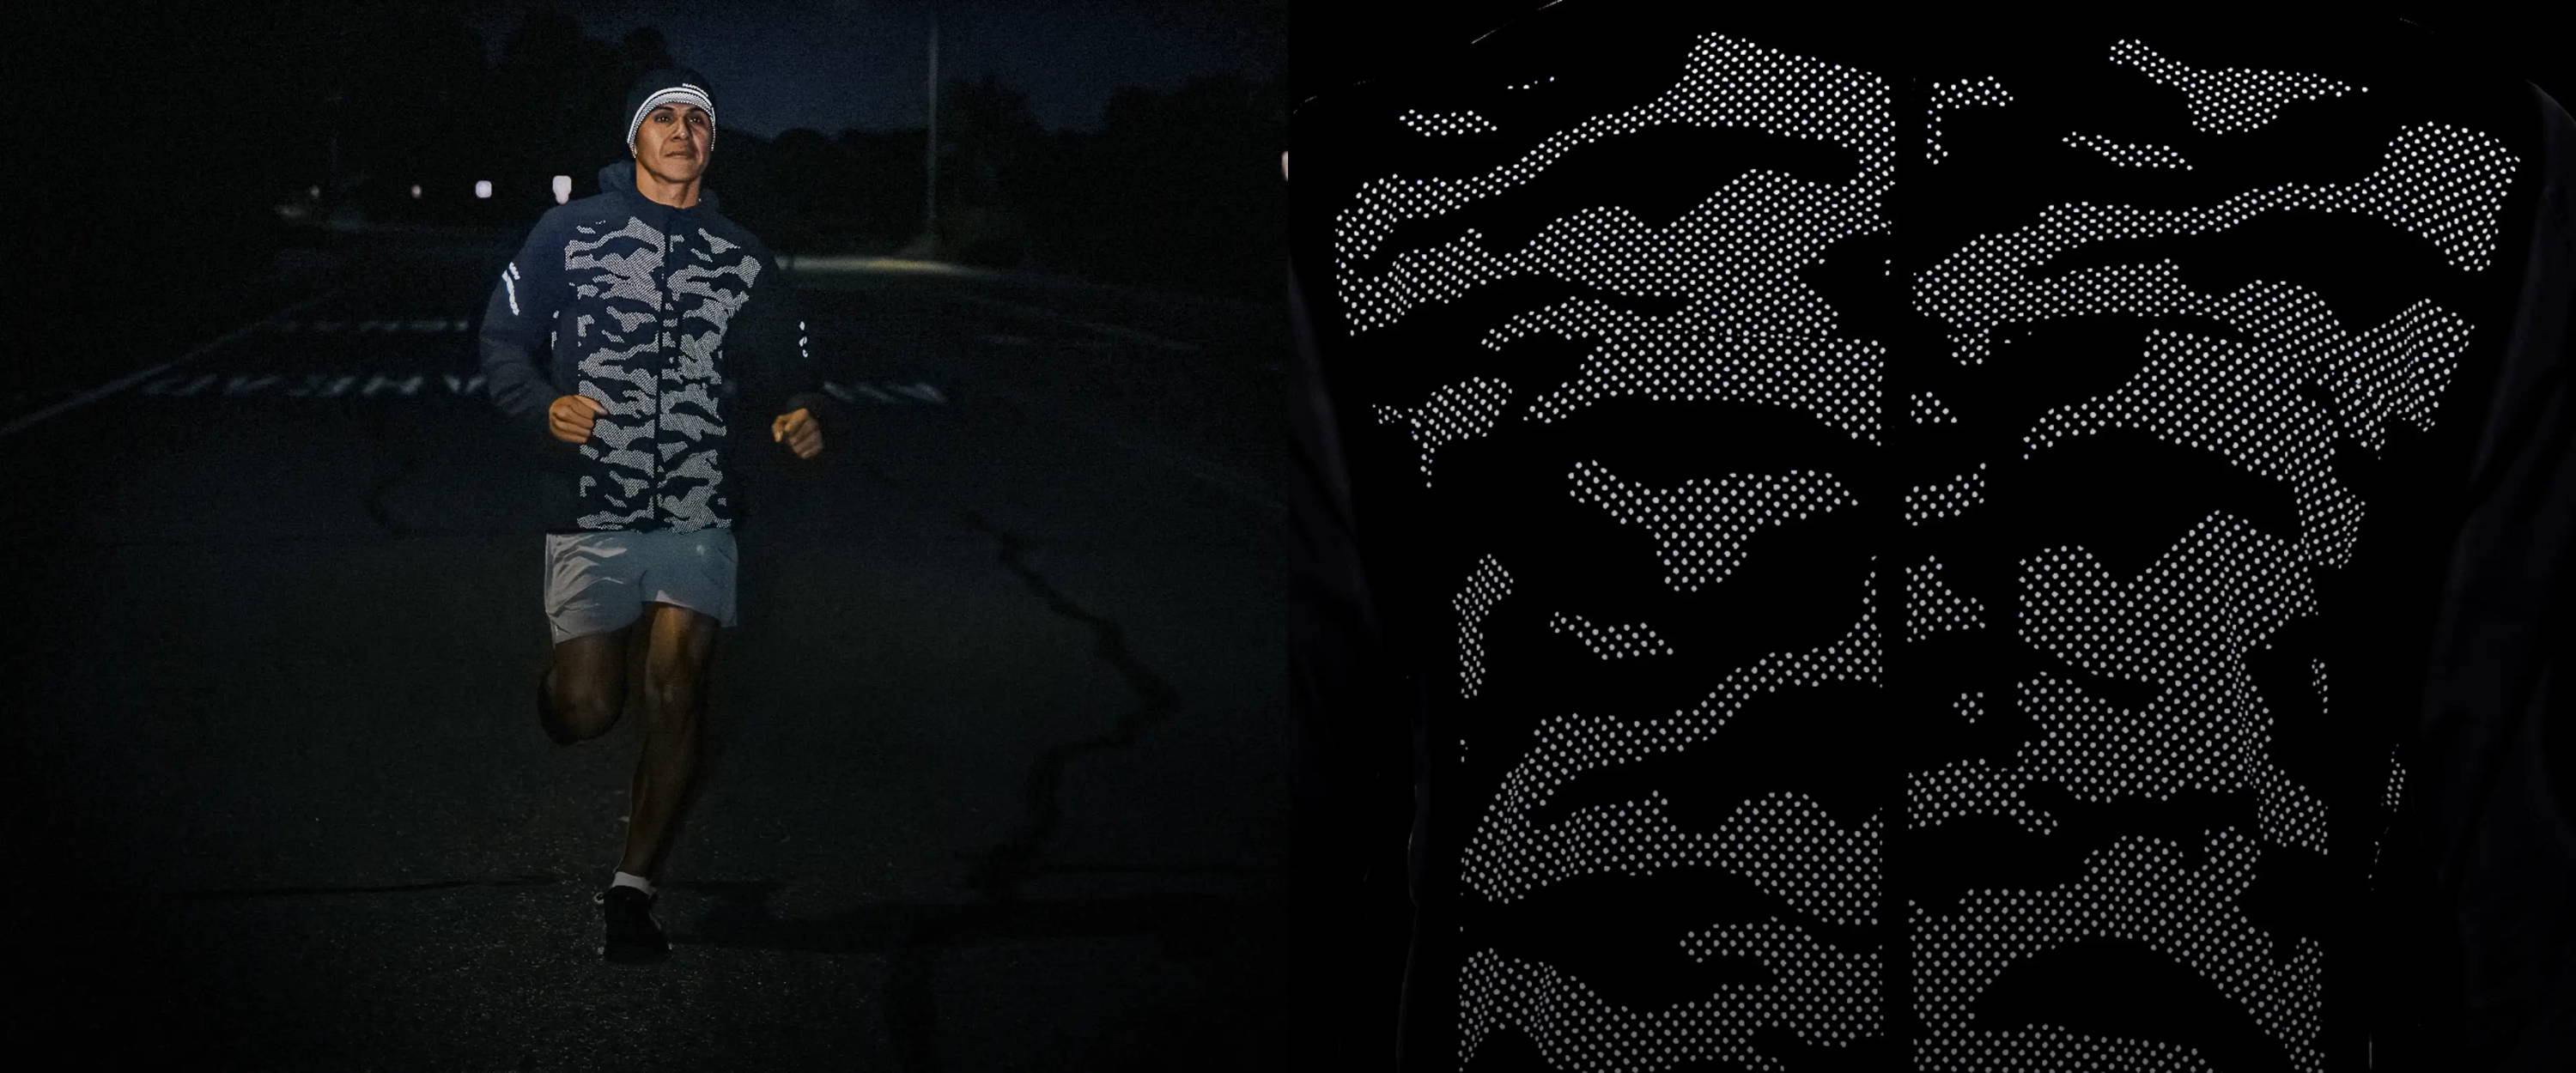 Split image with the left side showing a male runner running down the street at night wearing a Nathan HyperNight Stealth Jacket which shows off the reflectivity of the jacket and the right side of the image shows an up close image of the jacket.